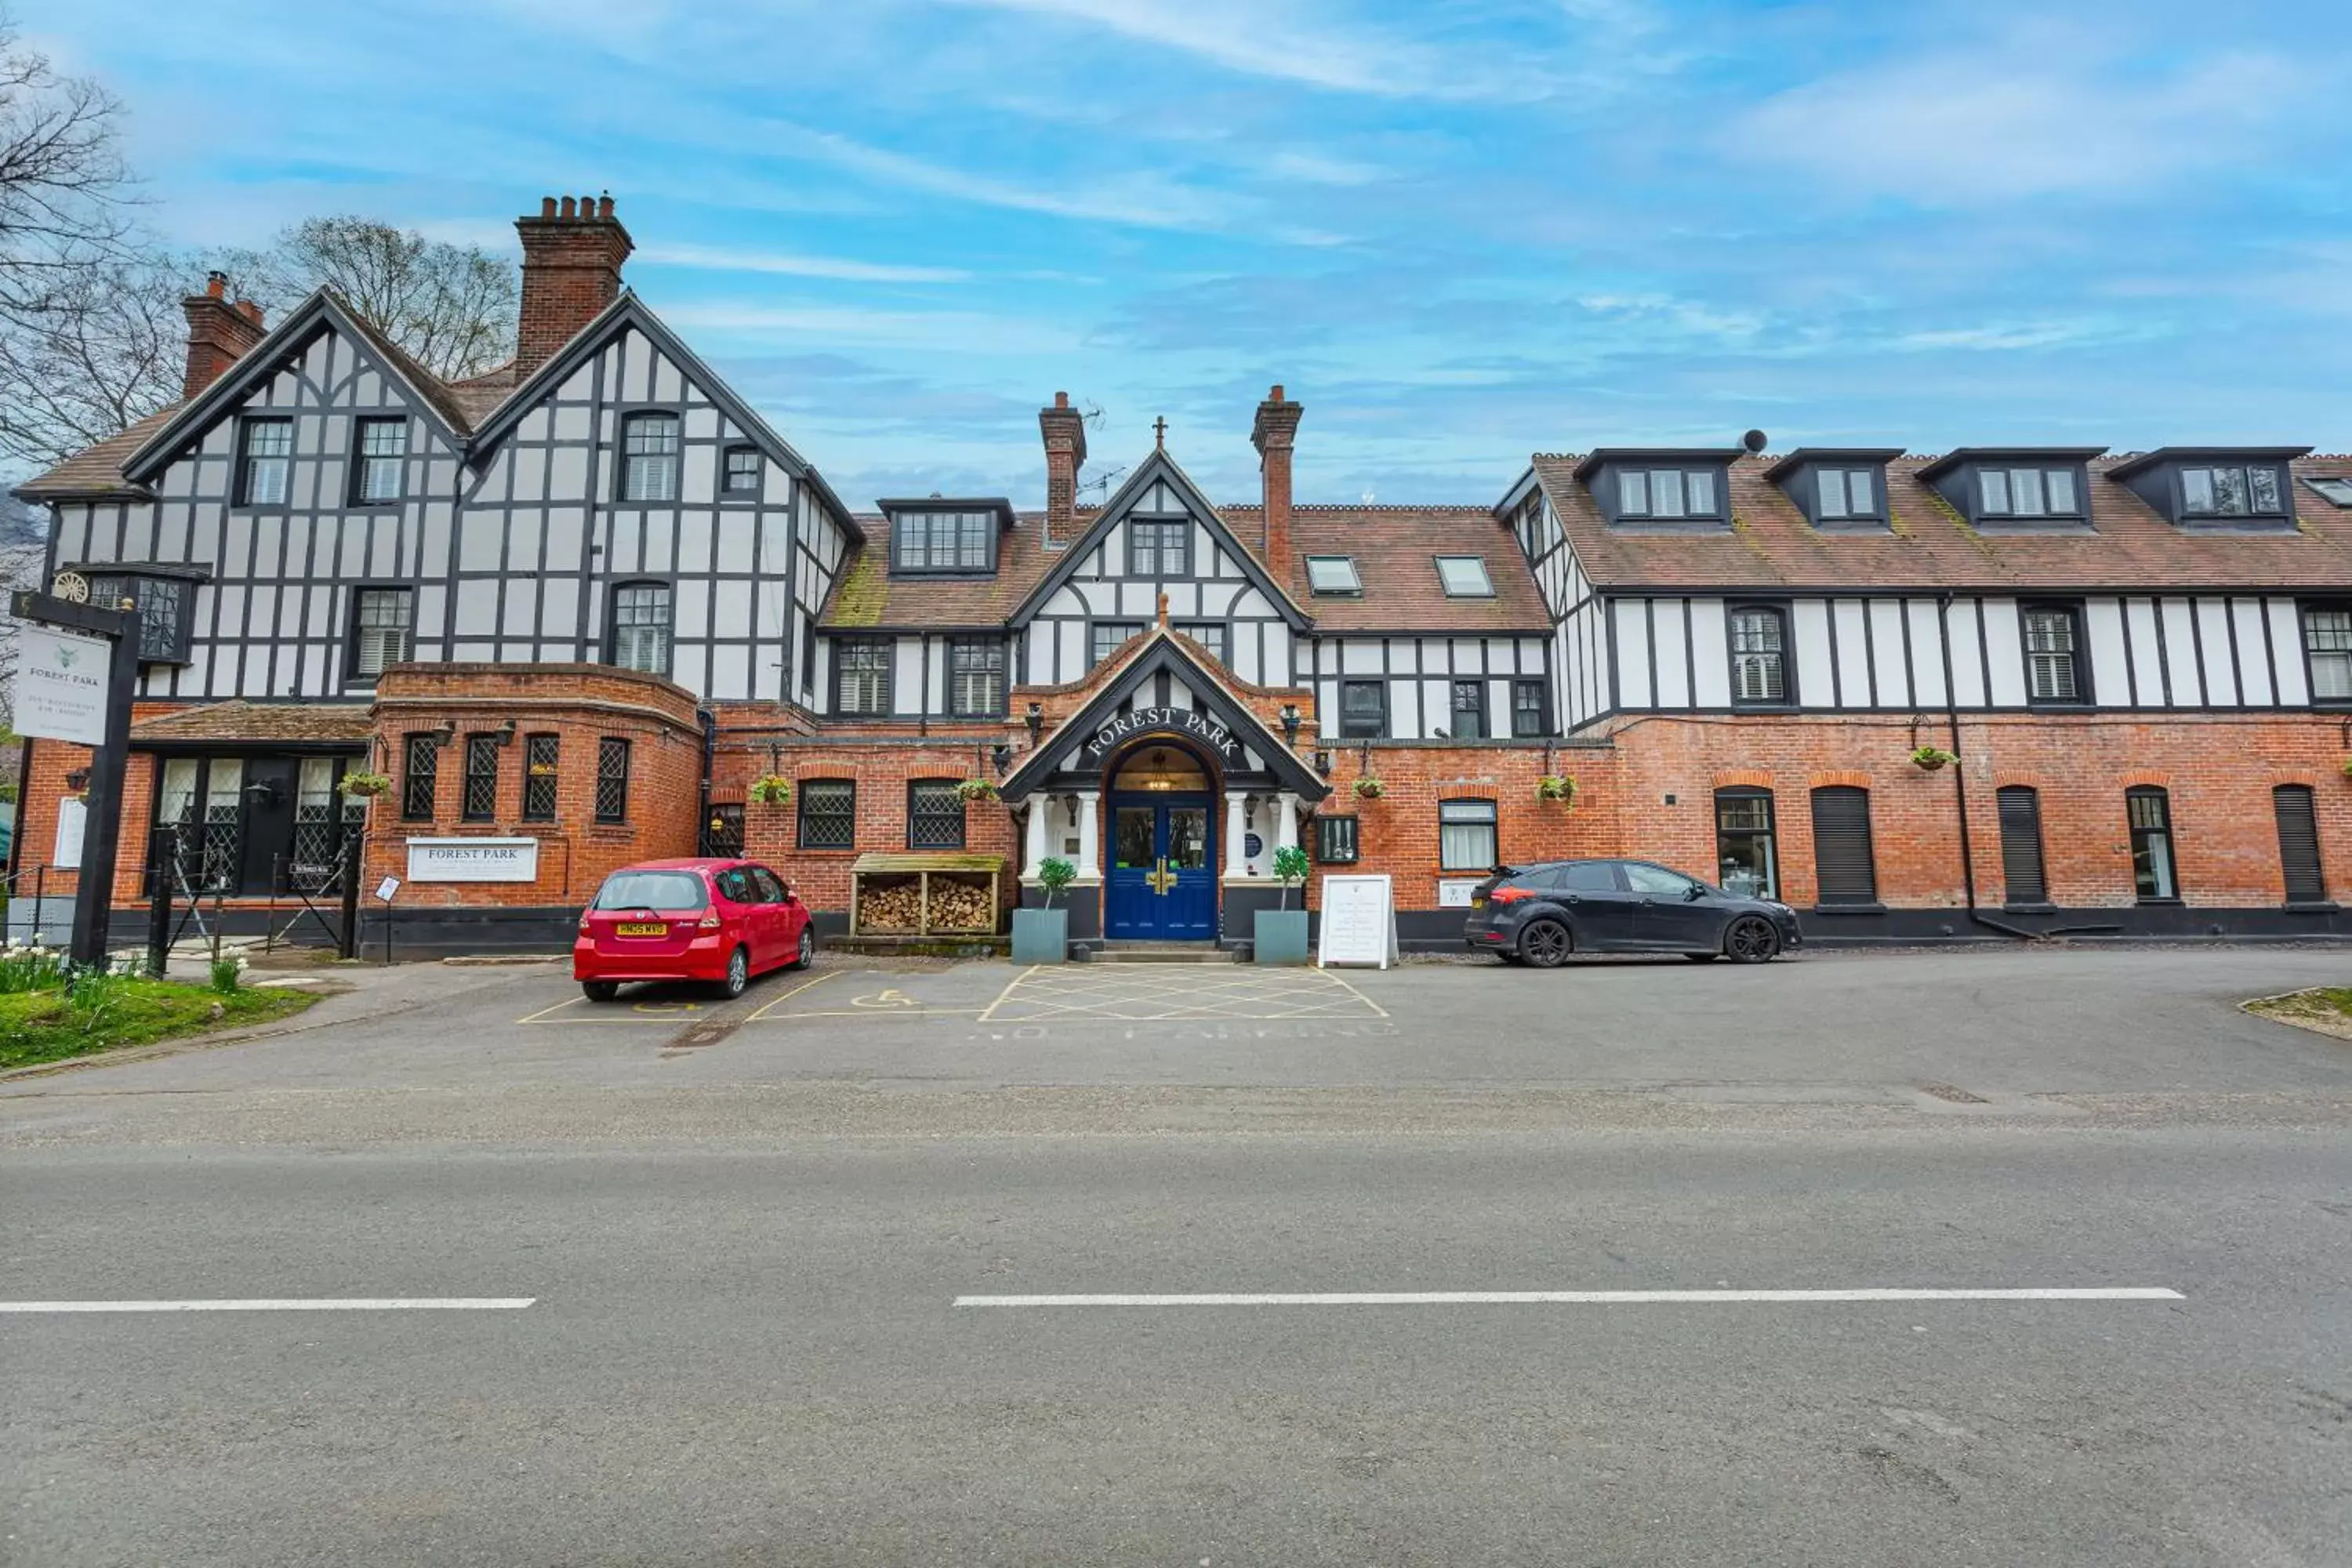 Property Building in Forest Park Country Hotel & Inn, Brockenhurst, New Forest, Hampshire